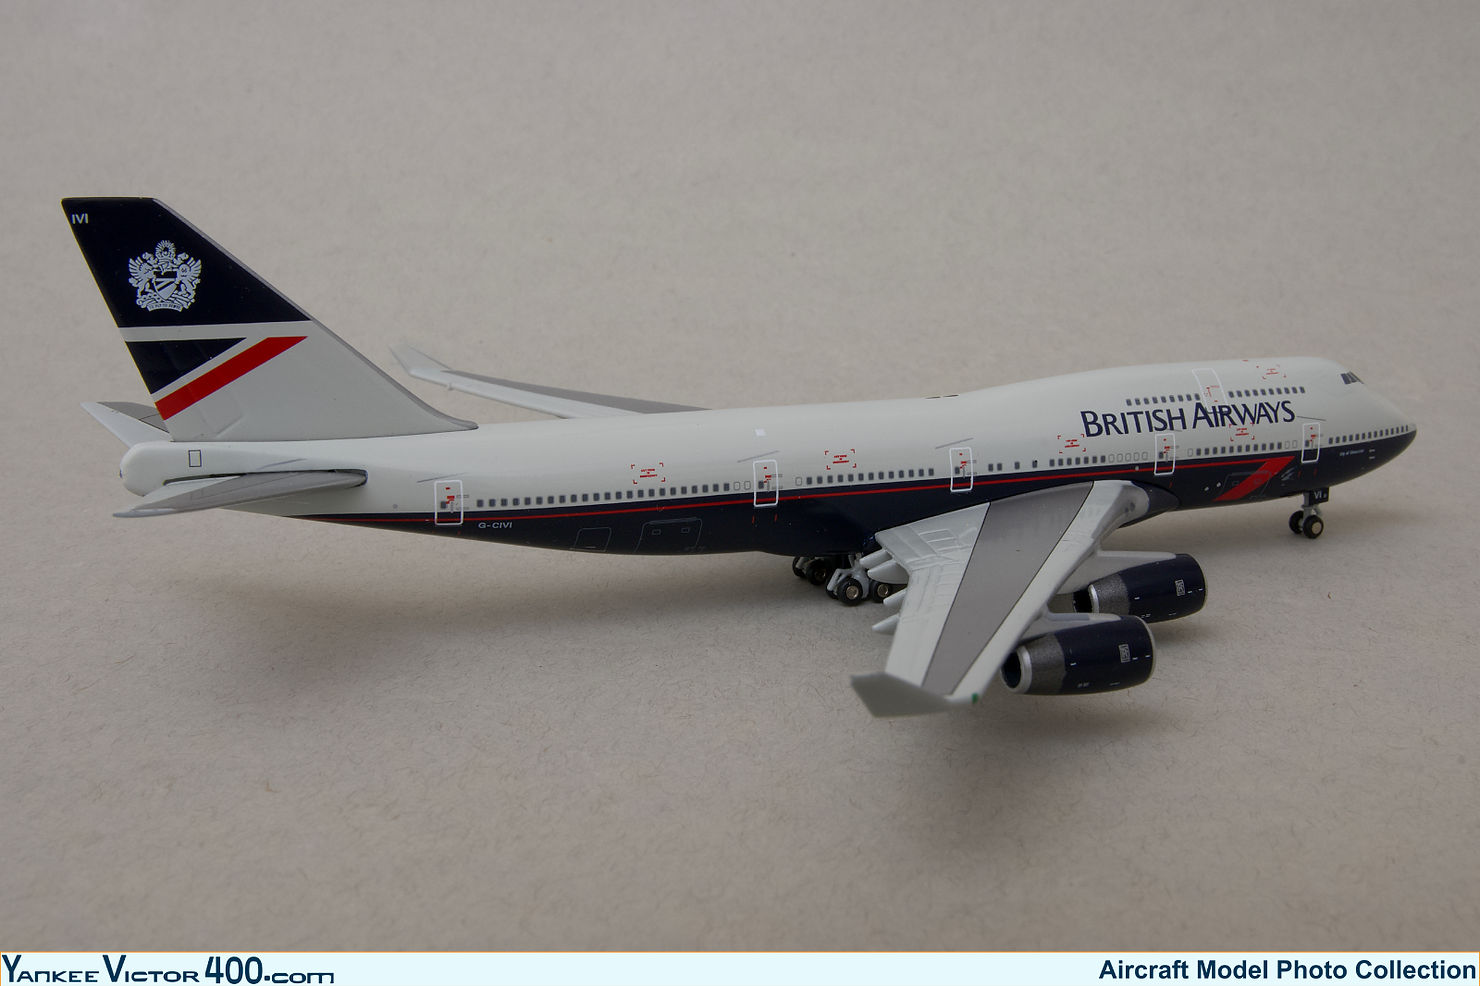 Scale model aircraft of a British Airways Boeing 747-436 registered G-CIVI made by GeminiJets in 1:400 scale